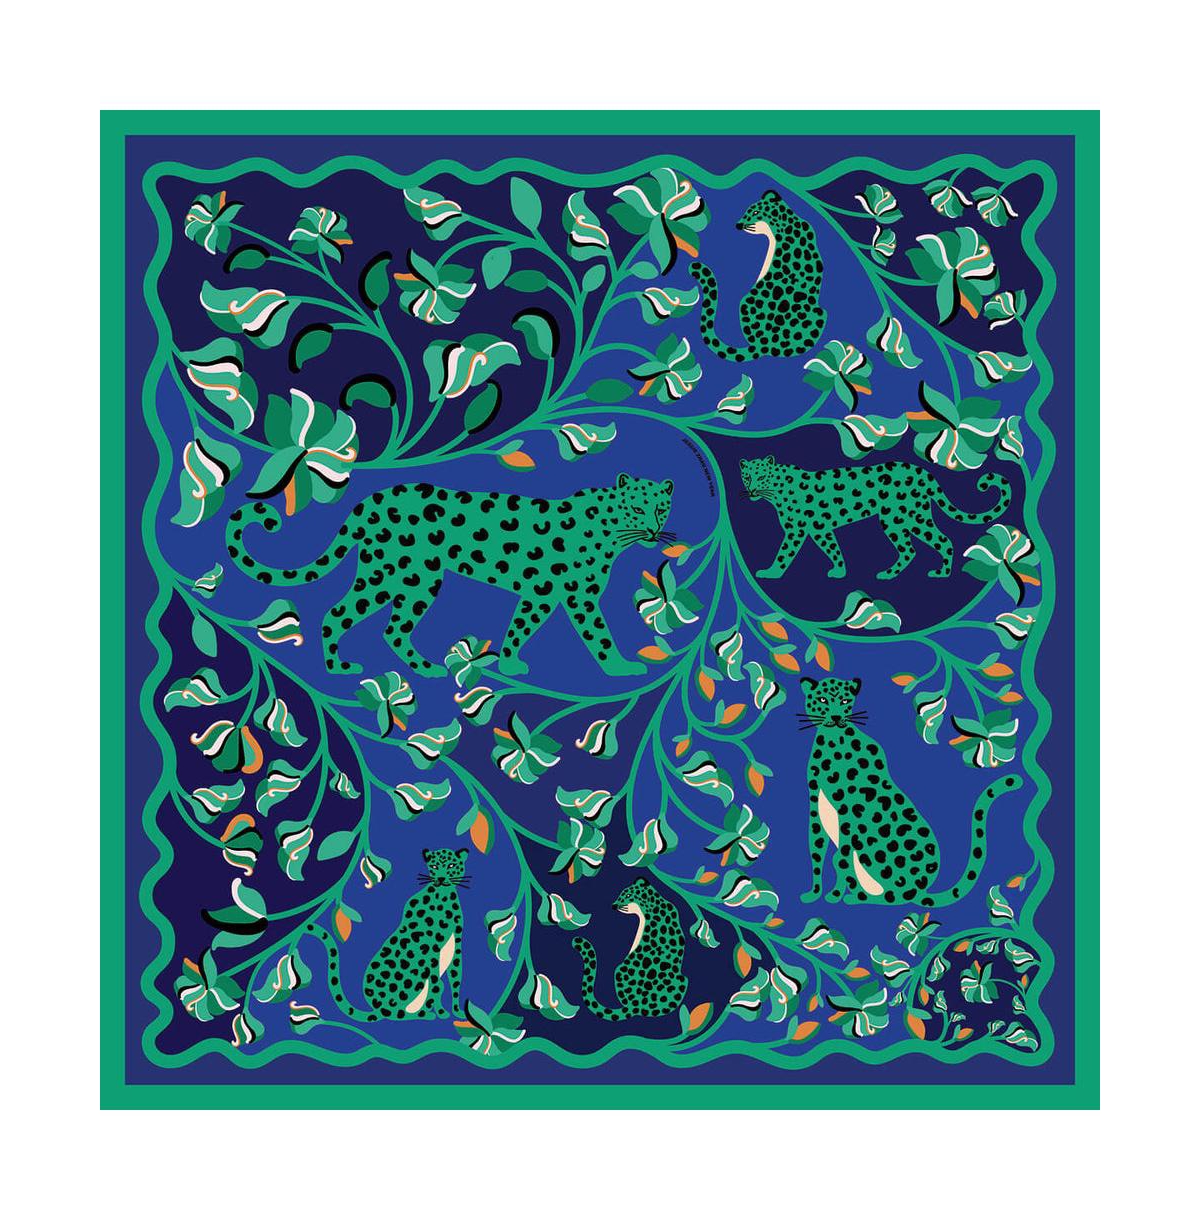 Double Sided Silk Scarf Of Leopards In The Verdant Wild - Green and blue